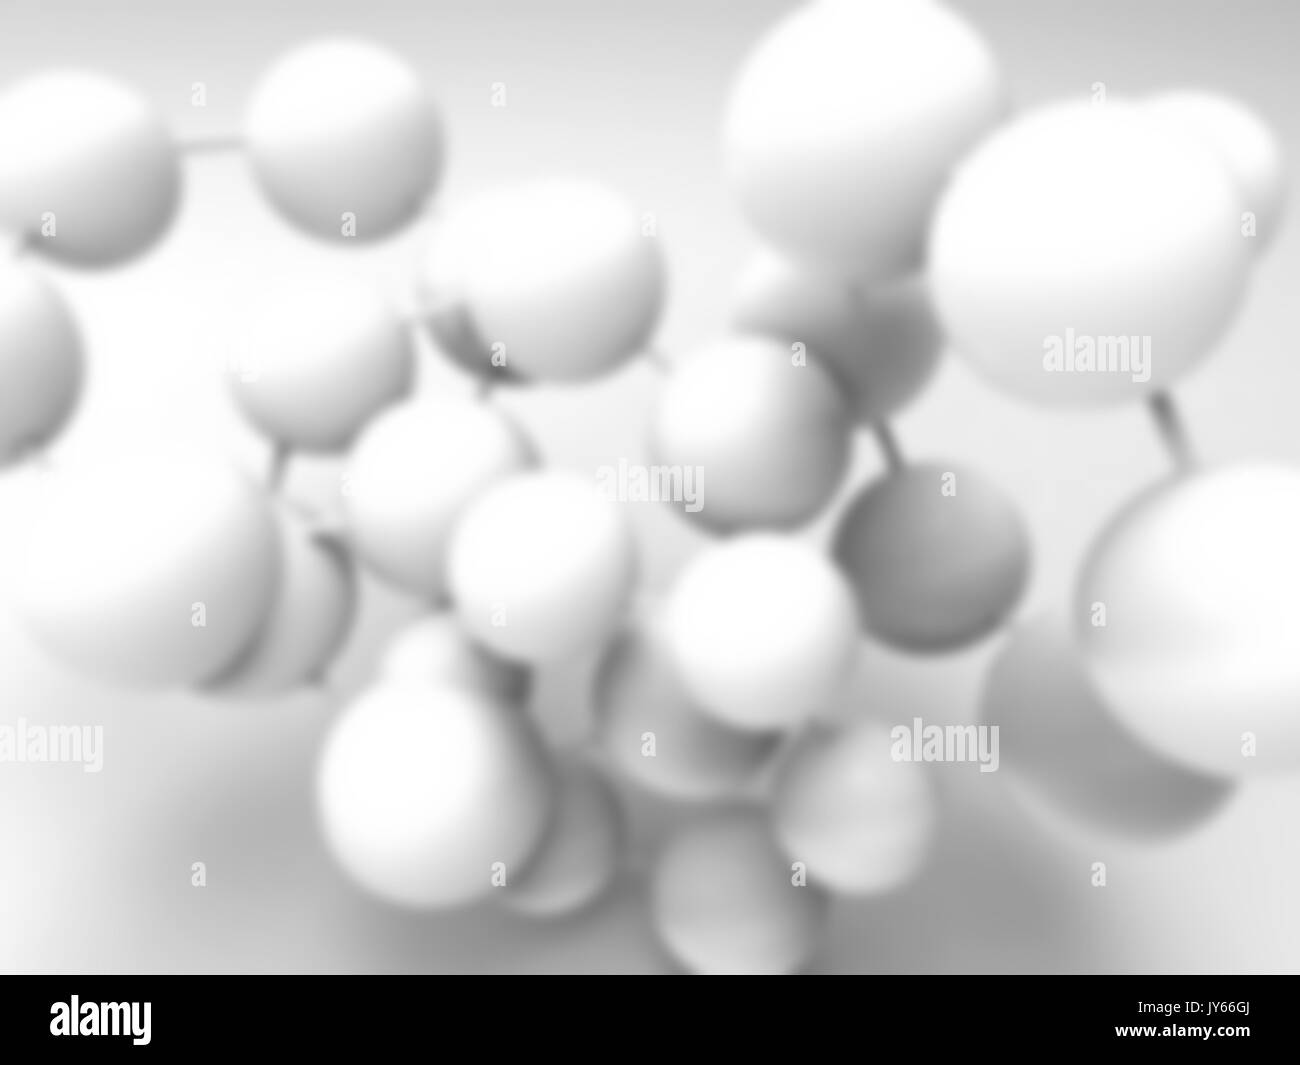 3d rendering circular molecul structure blurred background Stock Photo